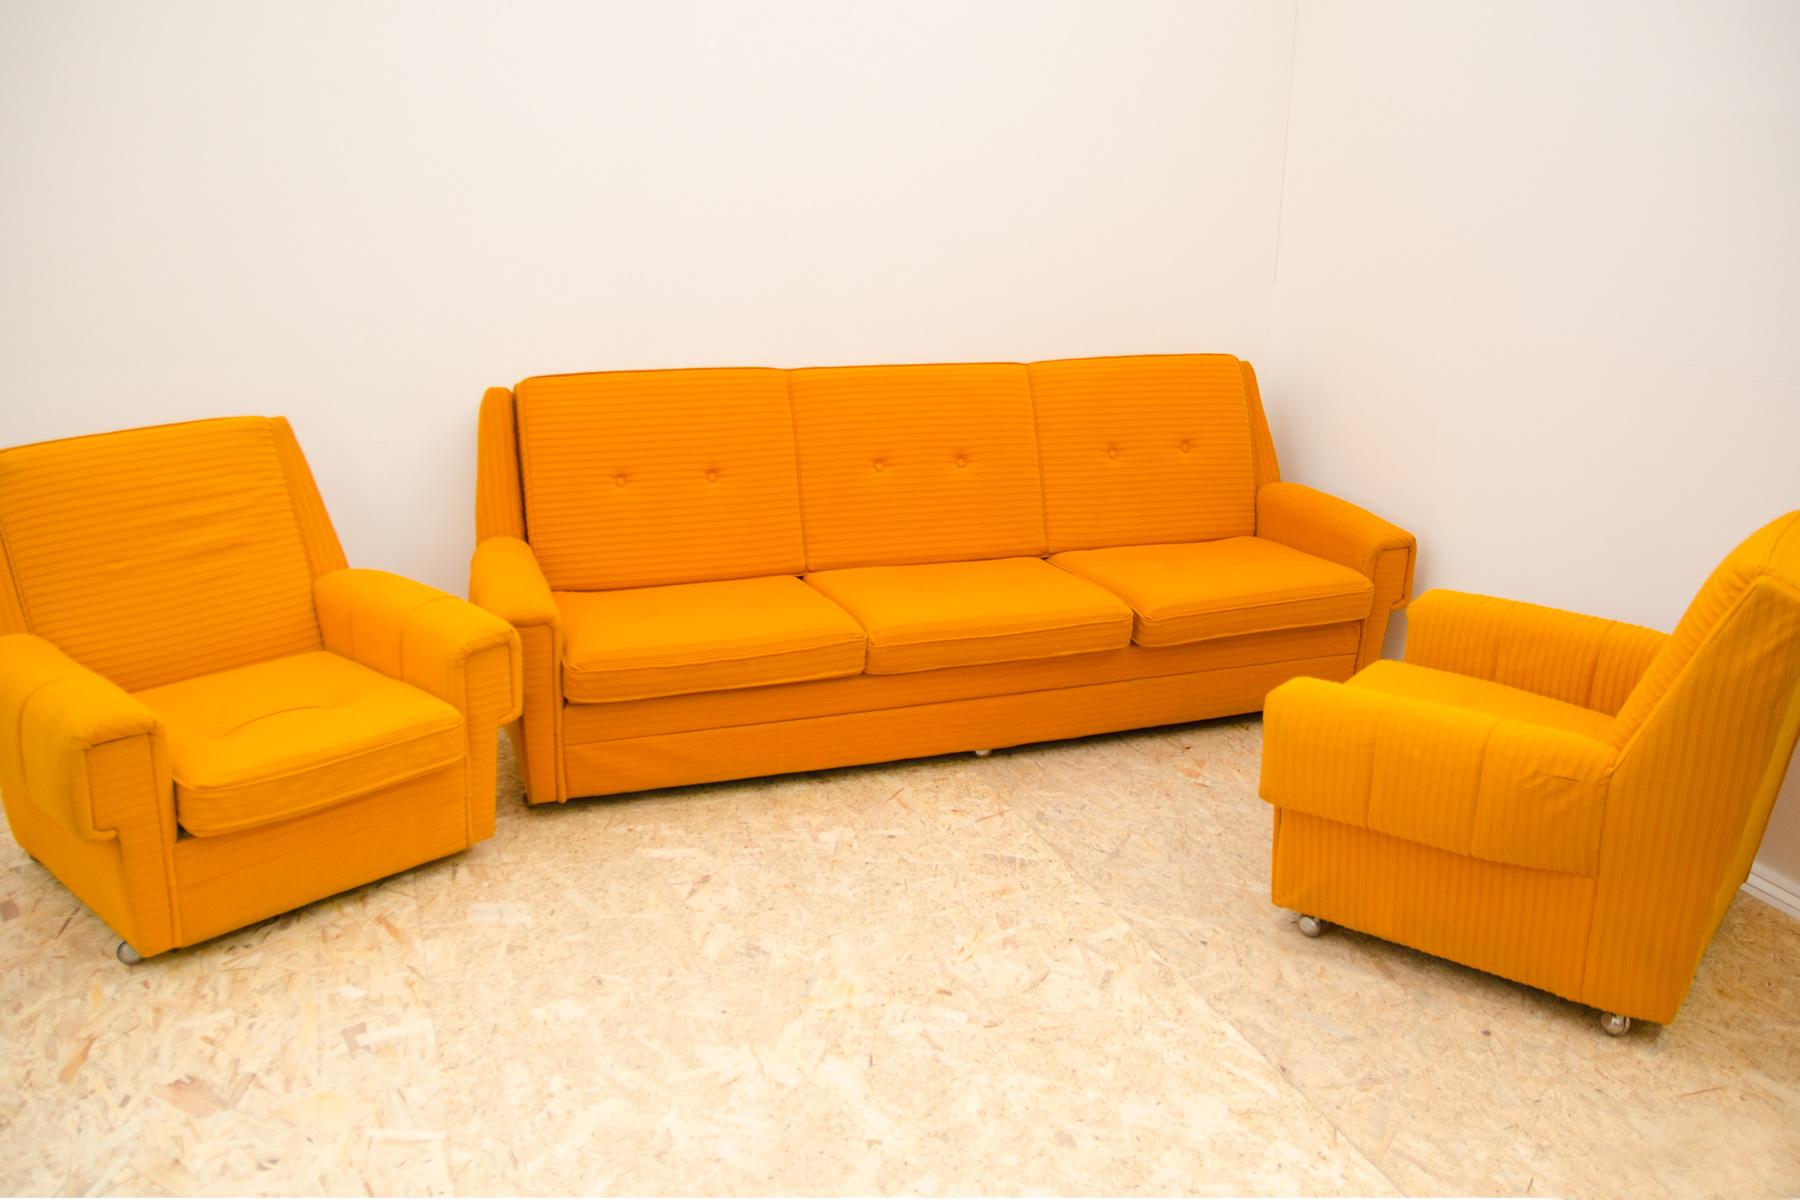 This vintage living room set is a typical example of European furniture design of the 1970/1980´s.

The furniture is very comfortable.
It consists of one sofa and two armchairs on wheels. The set has original upholstery, all in good original